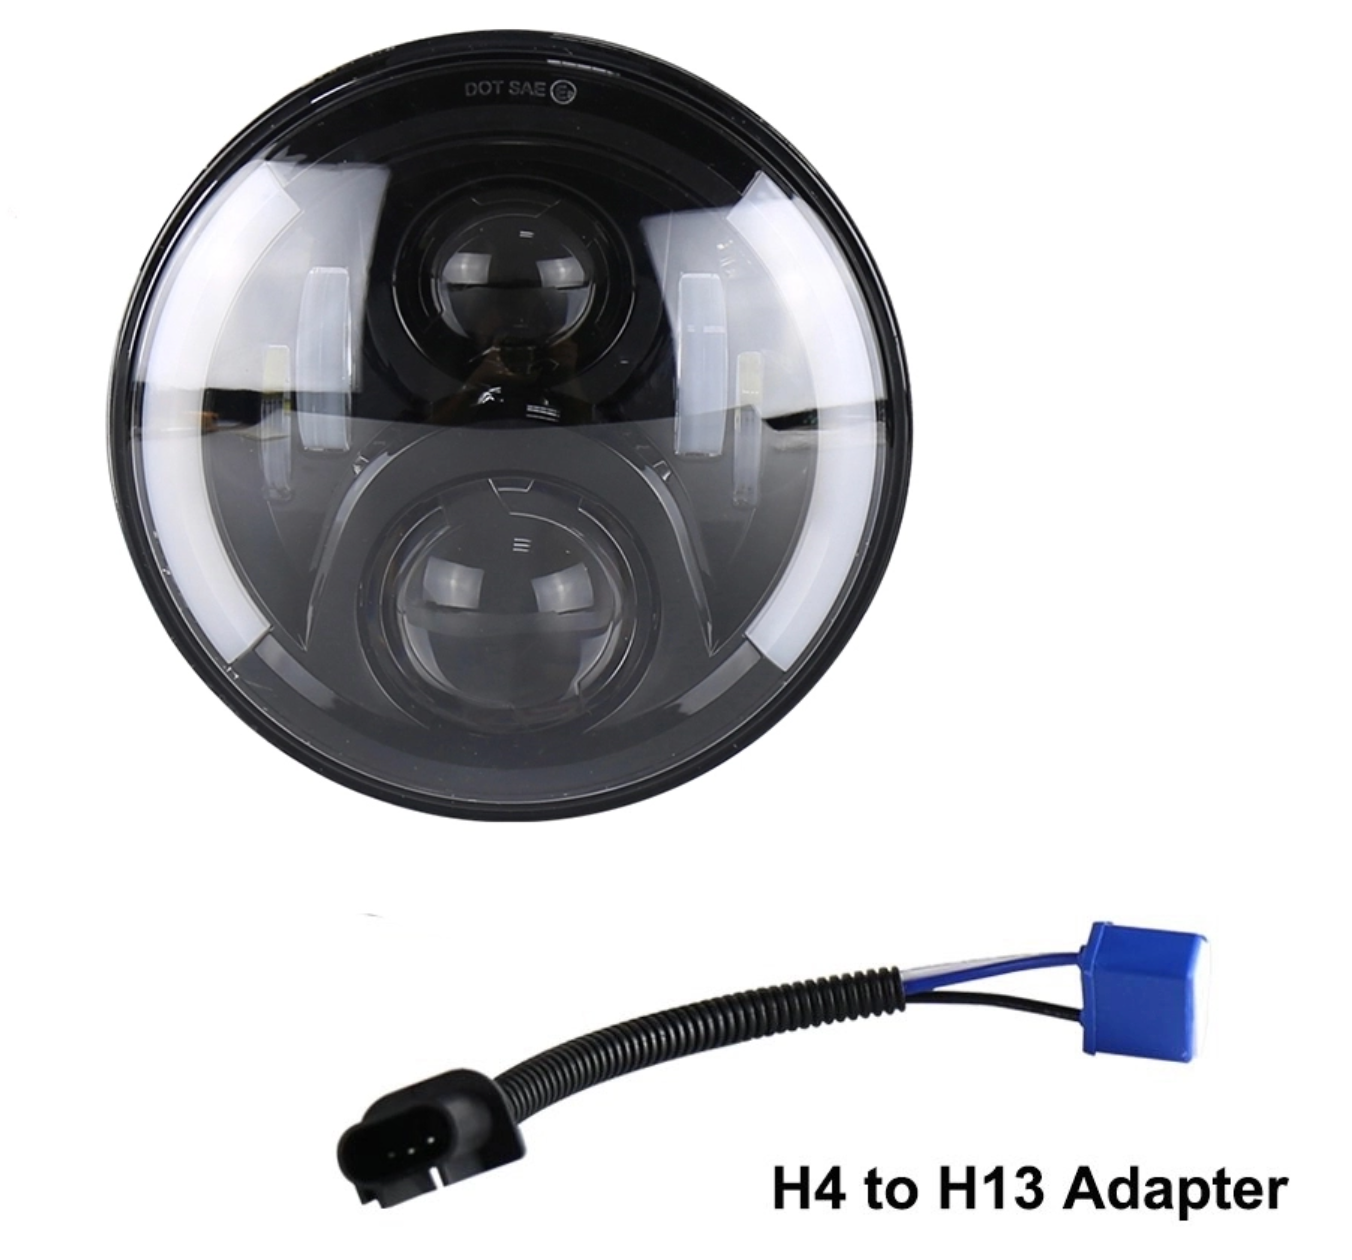 Code 4 LED 7″ 50 Watt motorcycle headlight with integrated turn signal, sold individually